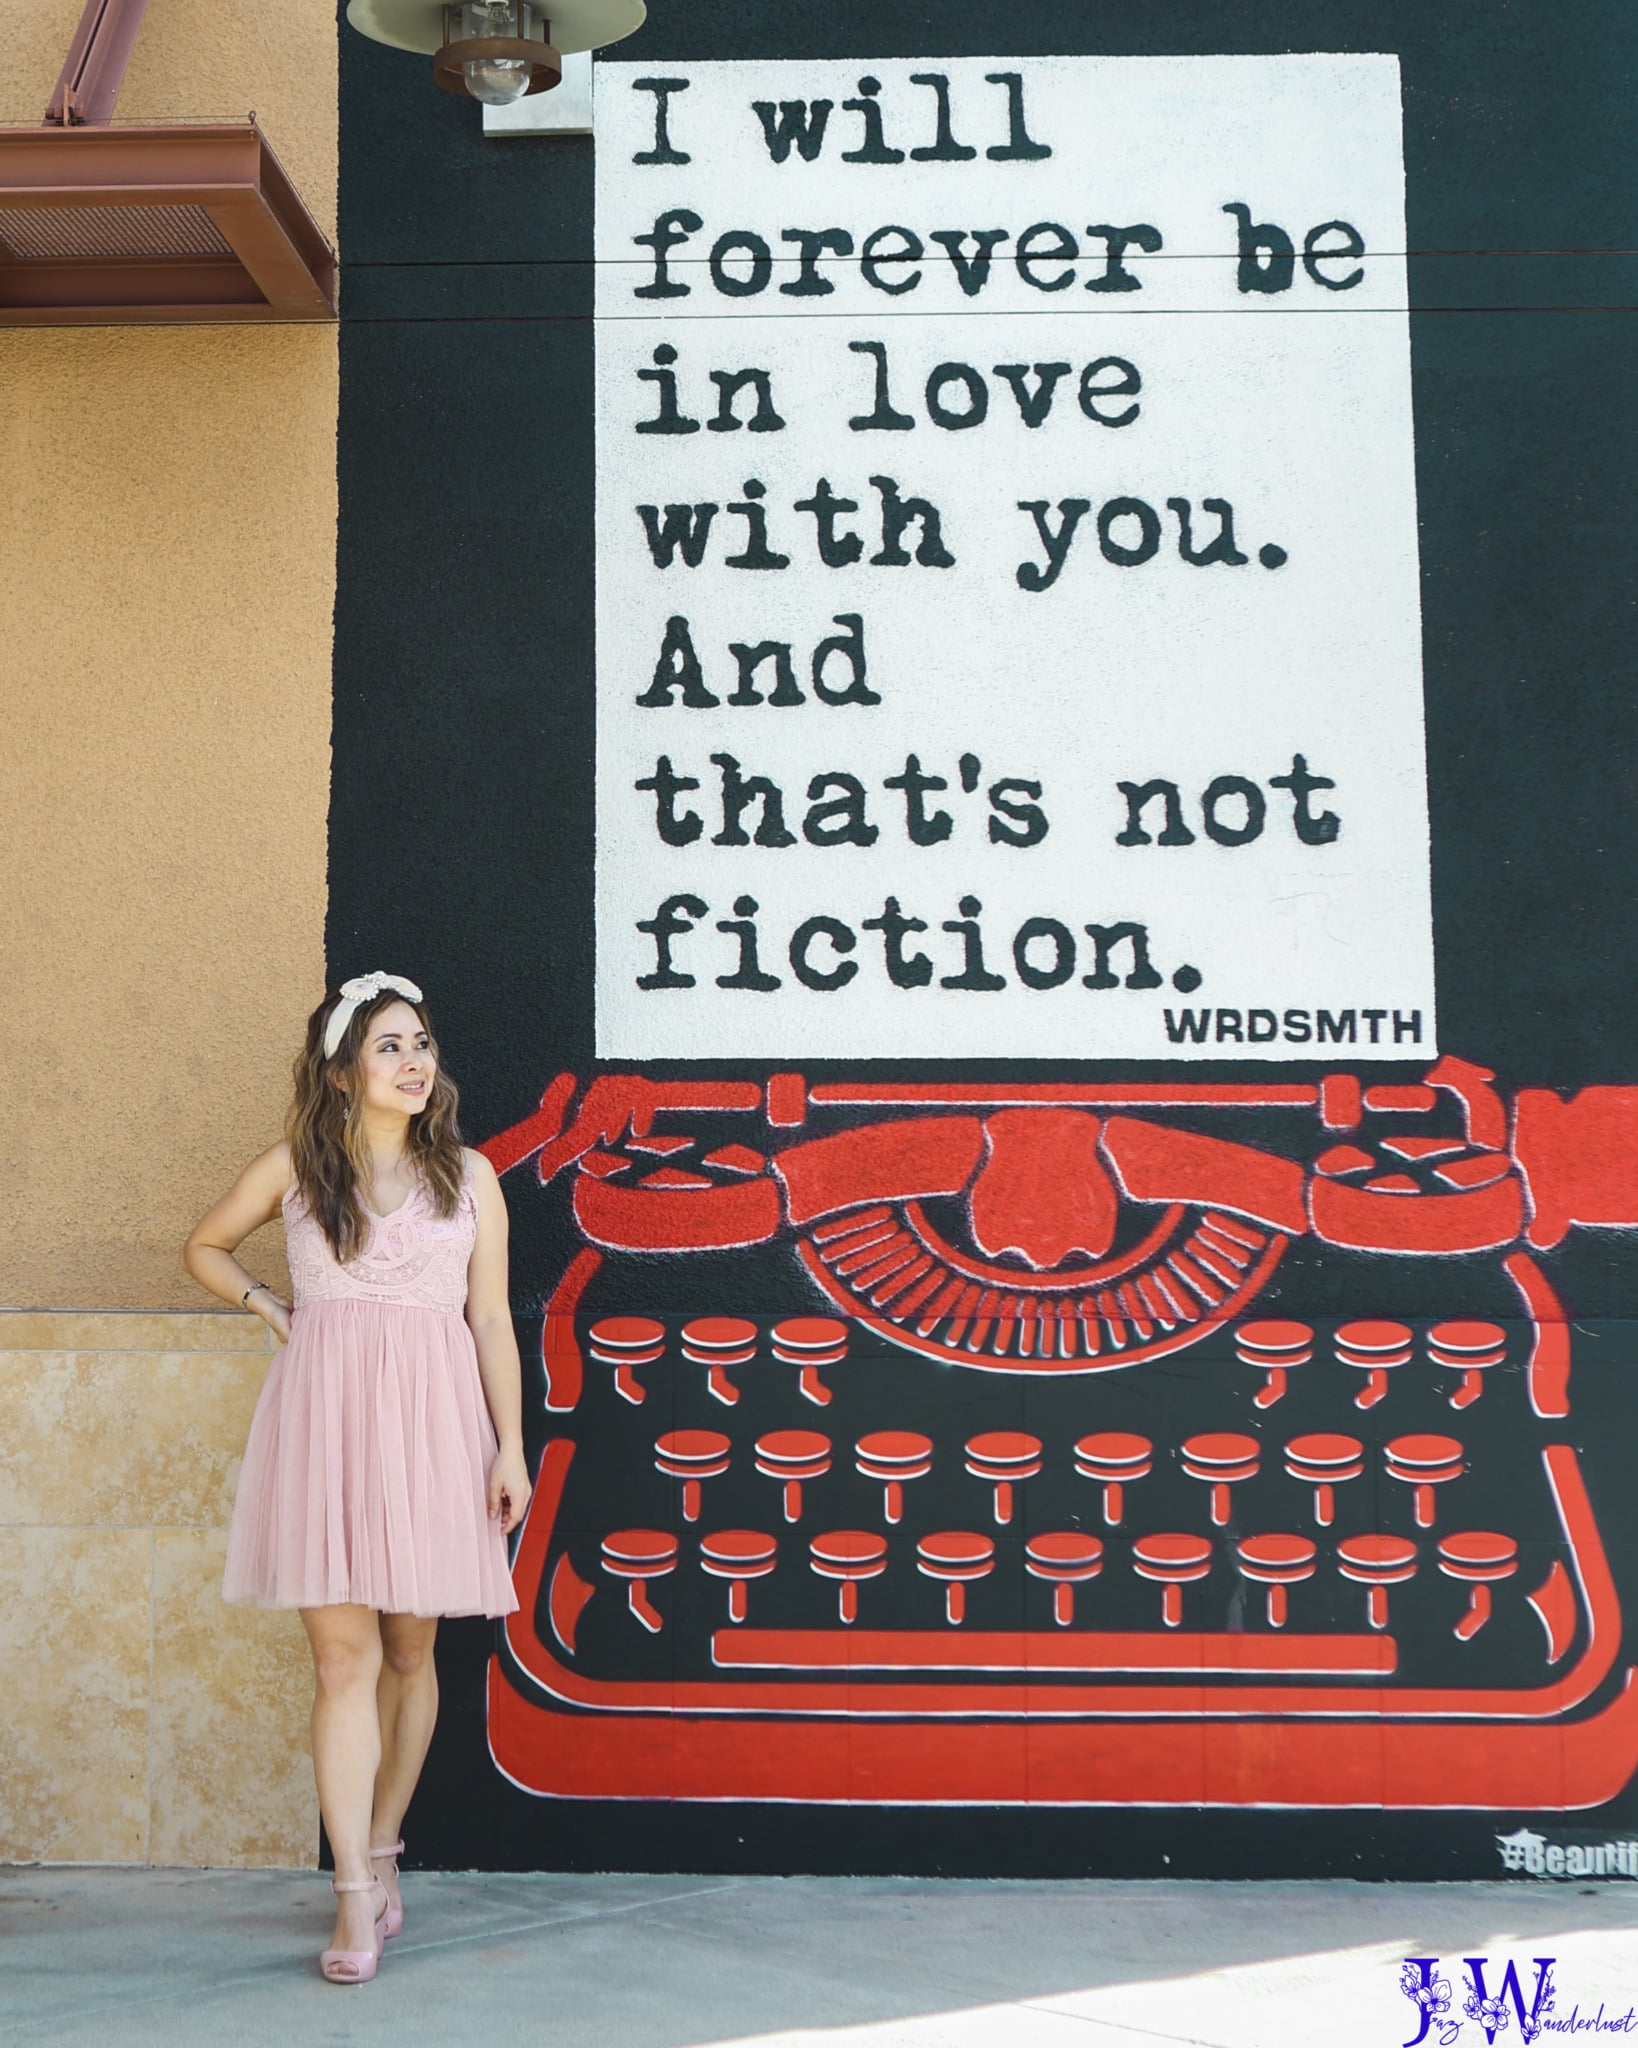 Typewriter mural in Pasadena by WRDSMTH. Photography by Jaz Wanderlust.